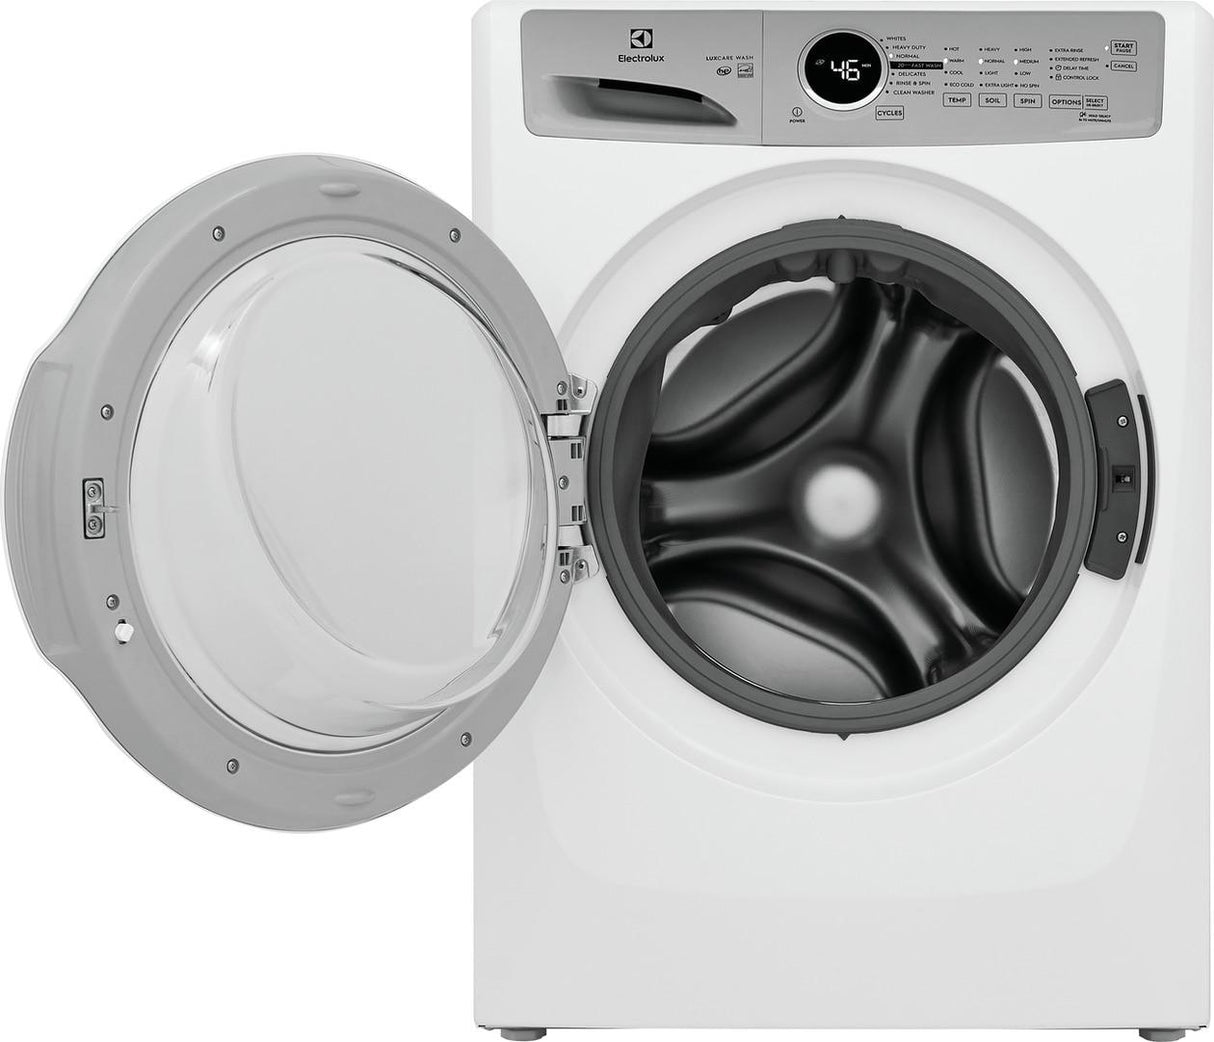 Electrolux ELFW7337AW Front Load Washer 27"